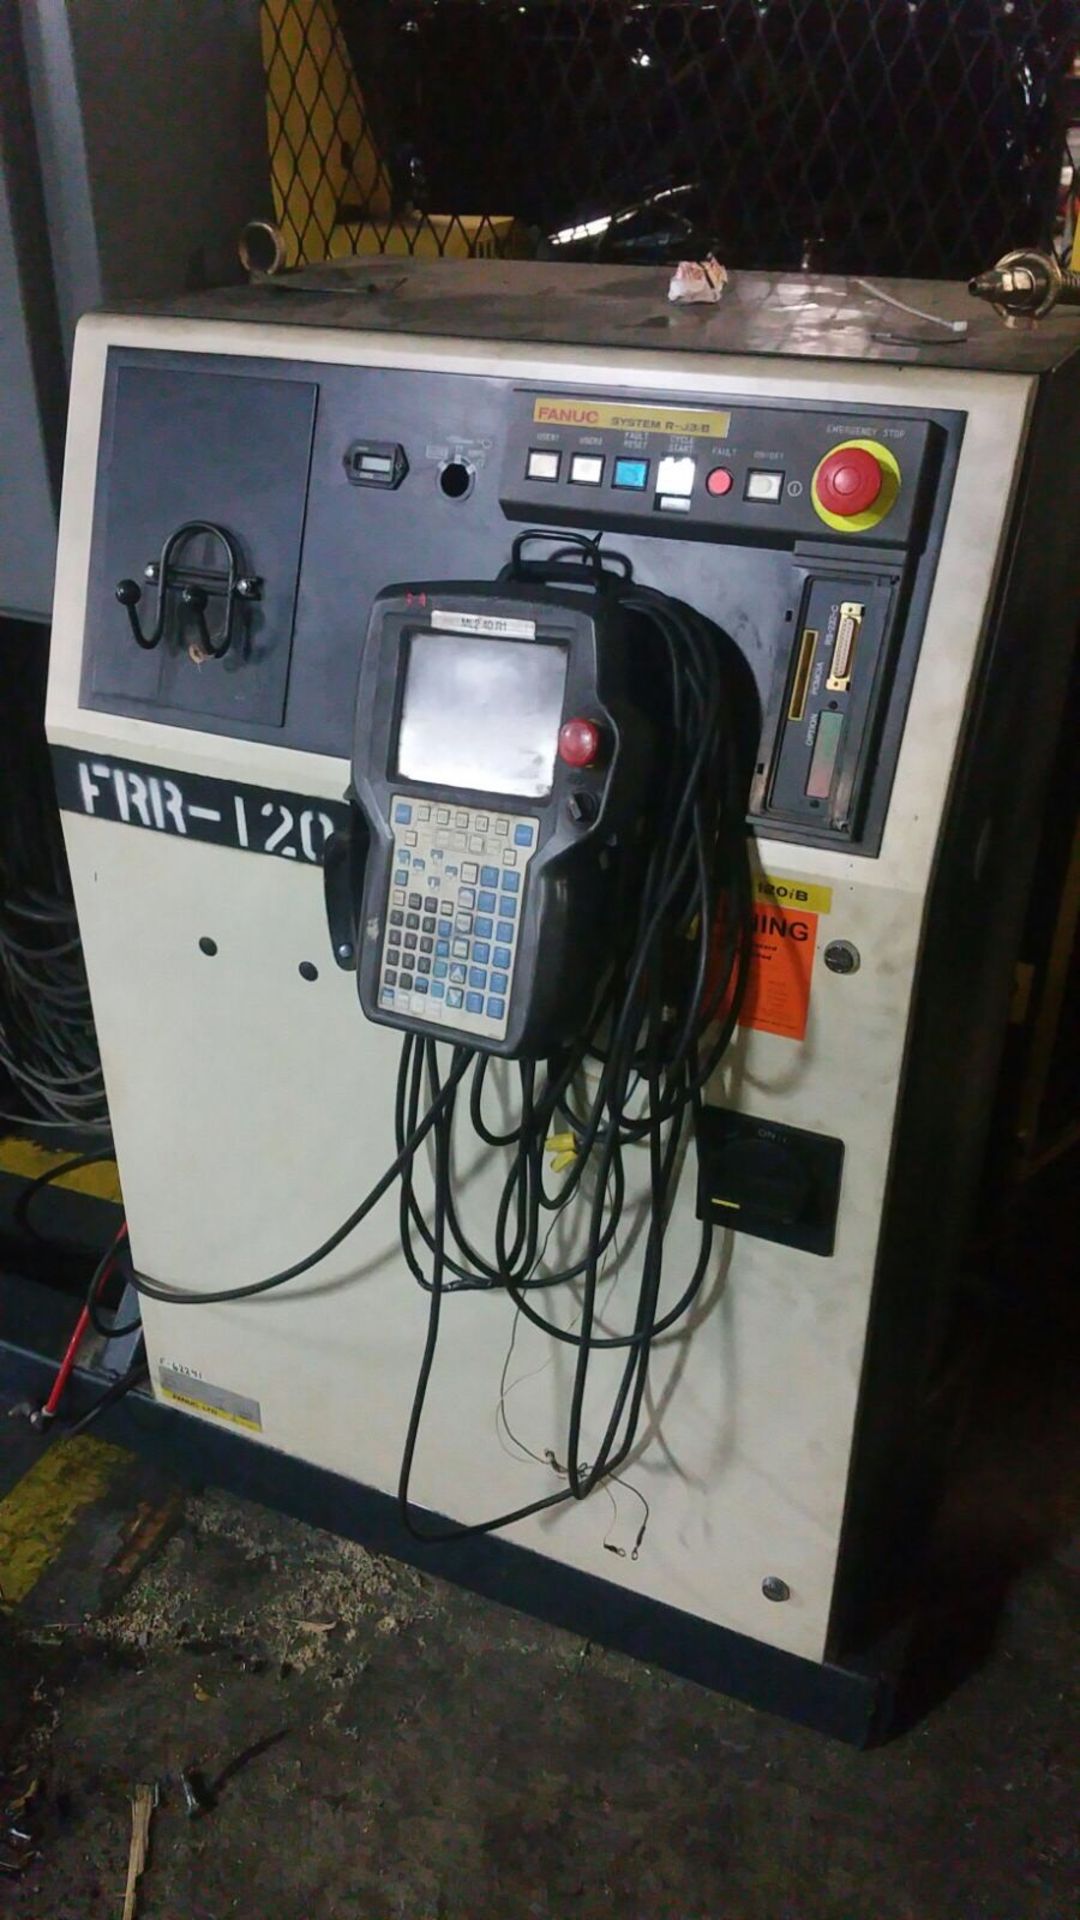 FANUC ARCMATE 120iB W/R-J3iB CONTROLS, CABLES, TEACH PENDANT AND LINCOLN POWERWAVE 455M POWER SUPPLY - Image 3 of 4